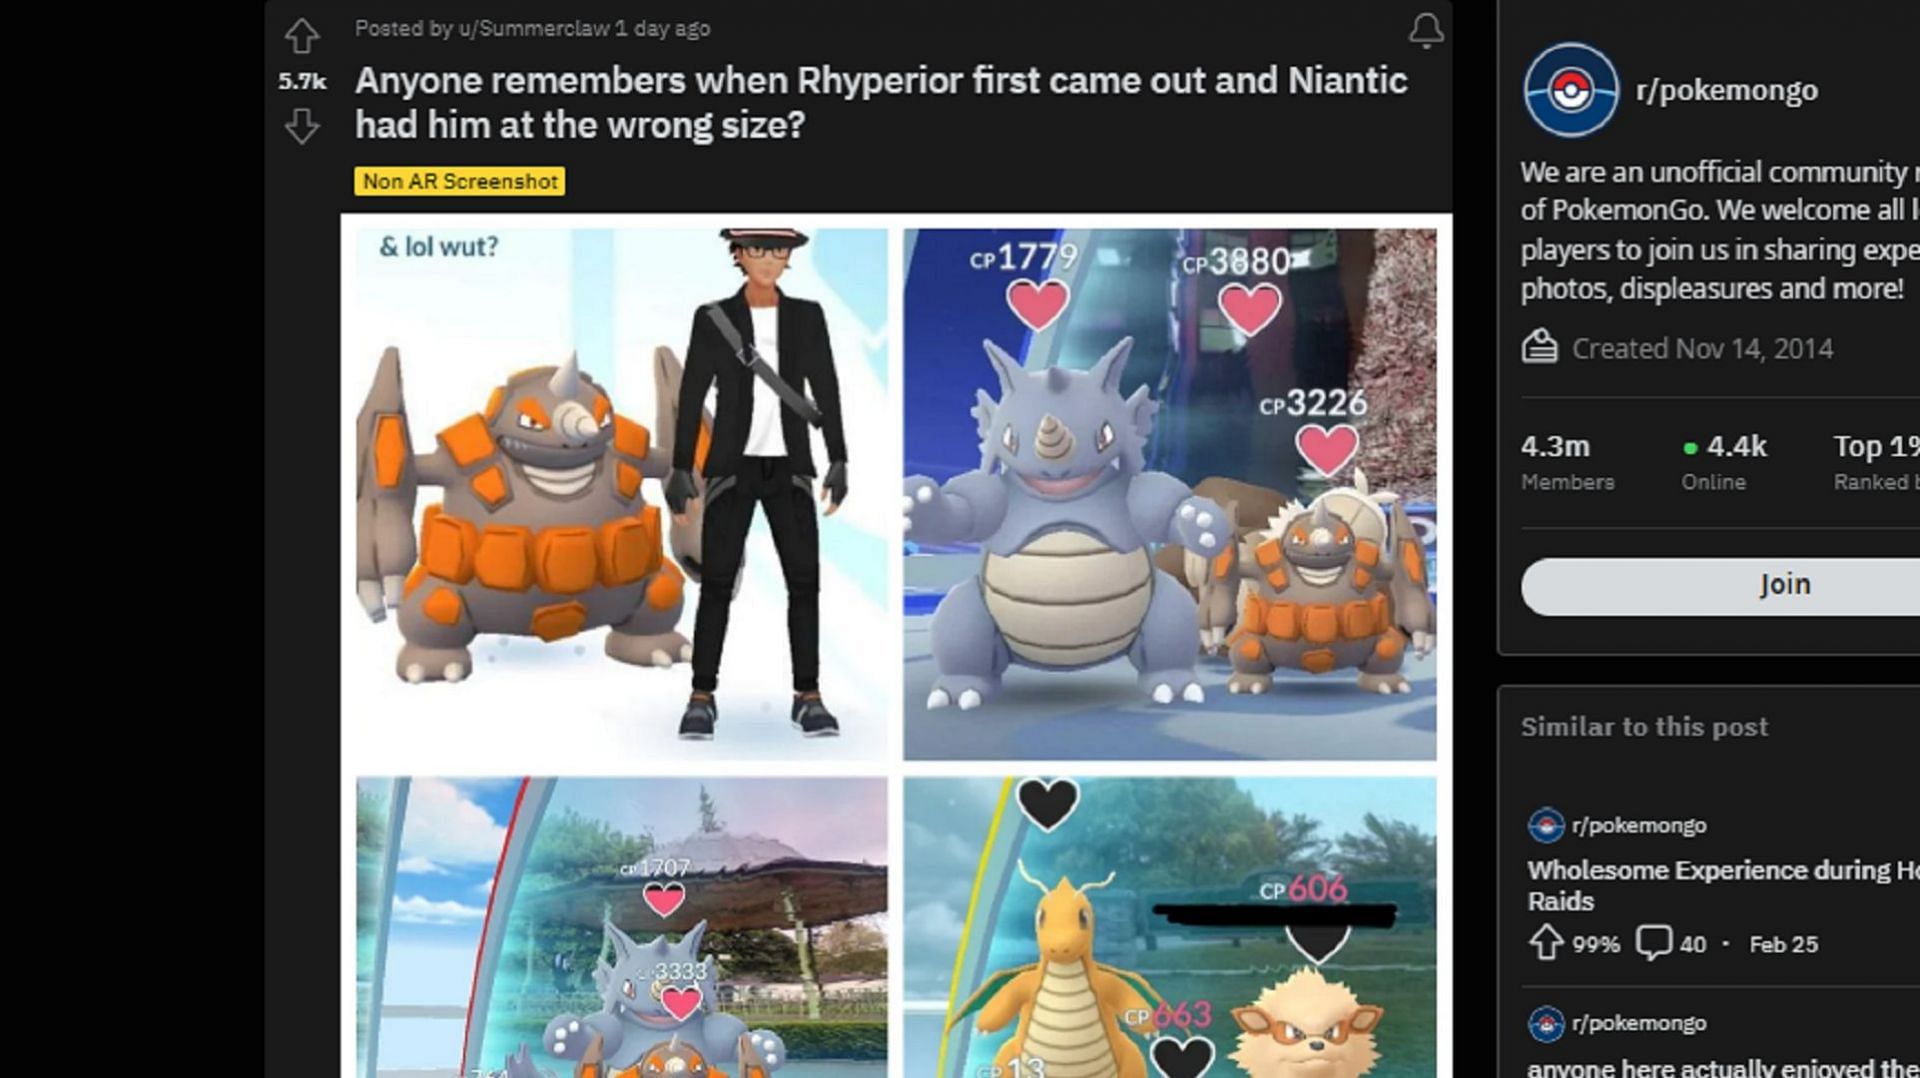 Rhyperior used to be smaller than its previous evolution Rhydon in Pokemon GO (Image via u/Summerclaw/Reddit)